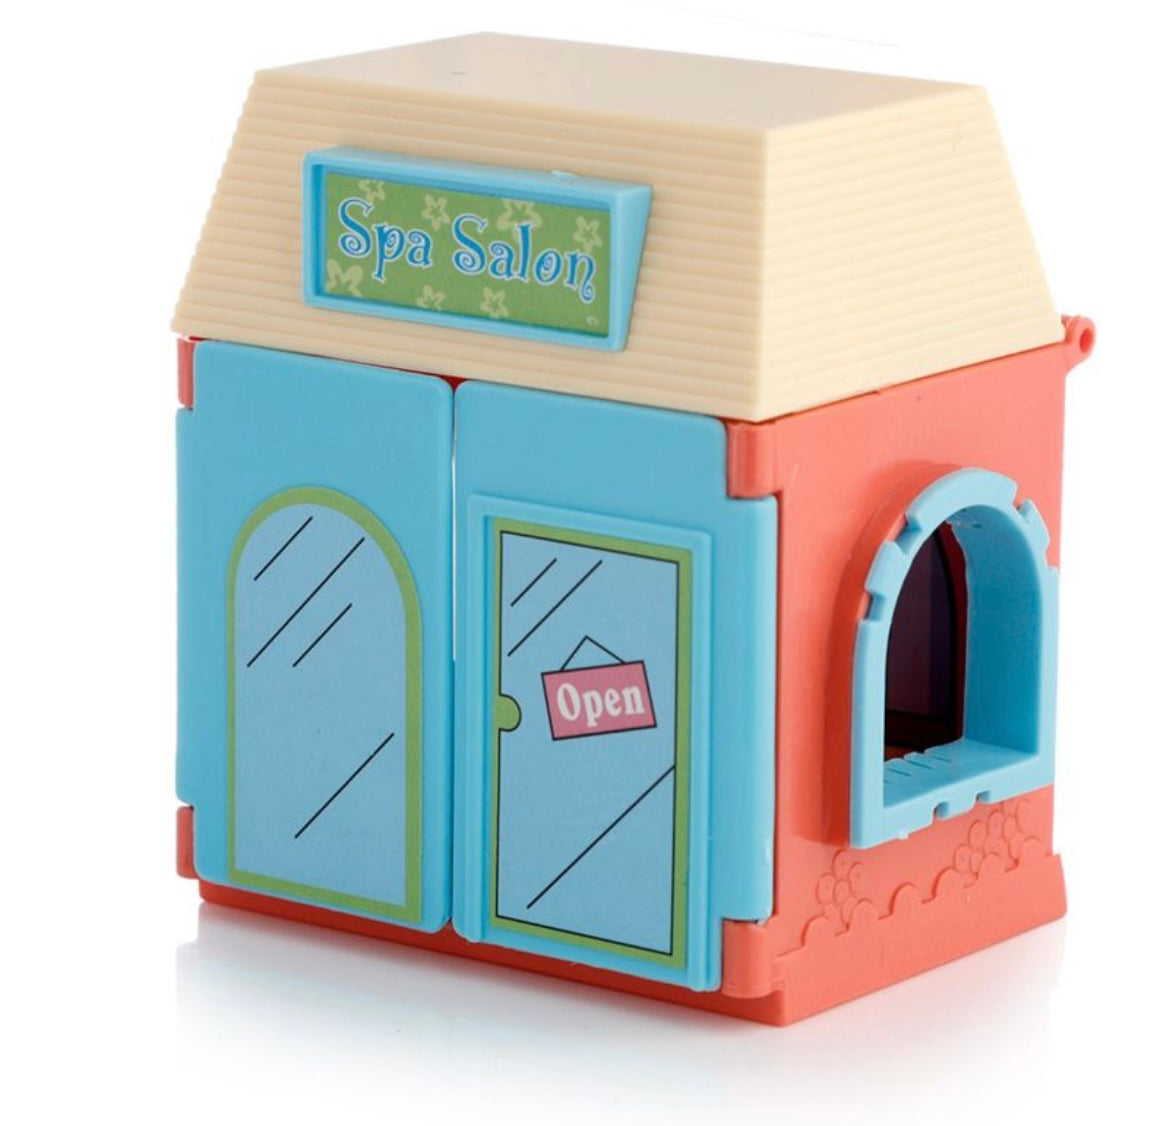 Cute Puppy Dog Town House Set - Select Your Choice